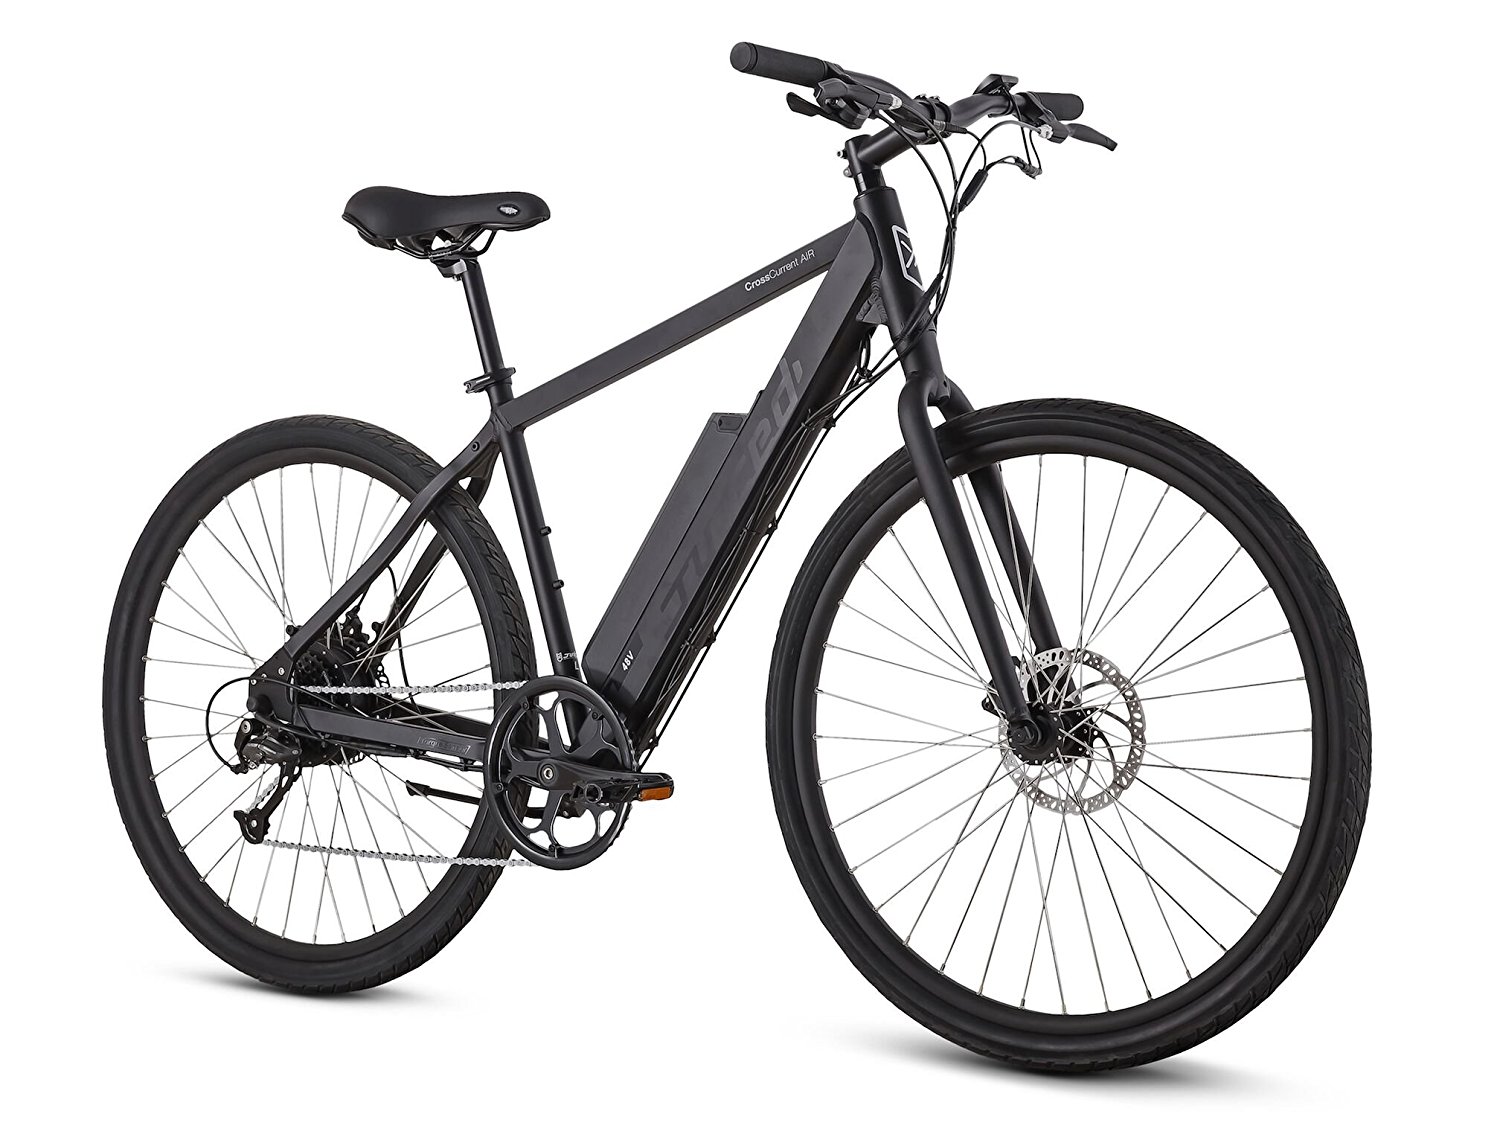 10. Juiced Bikes CrossCurrent AIR 500W Electric Bicycle